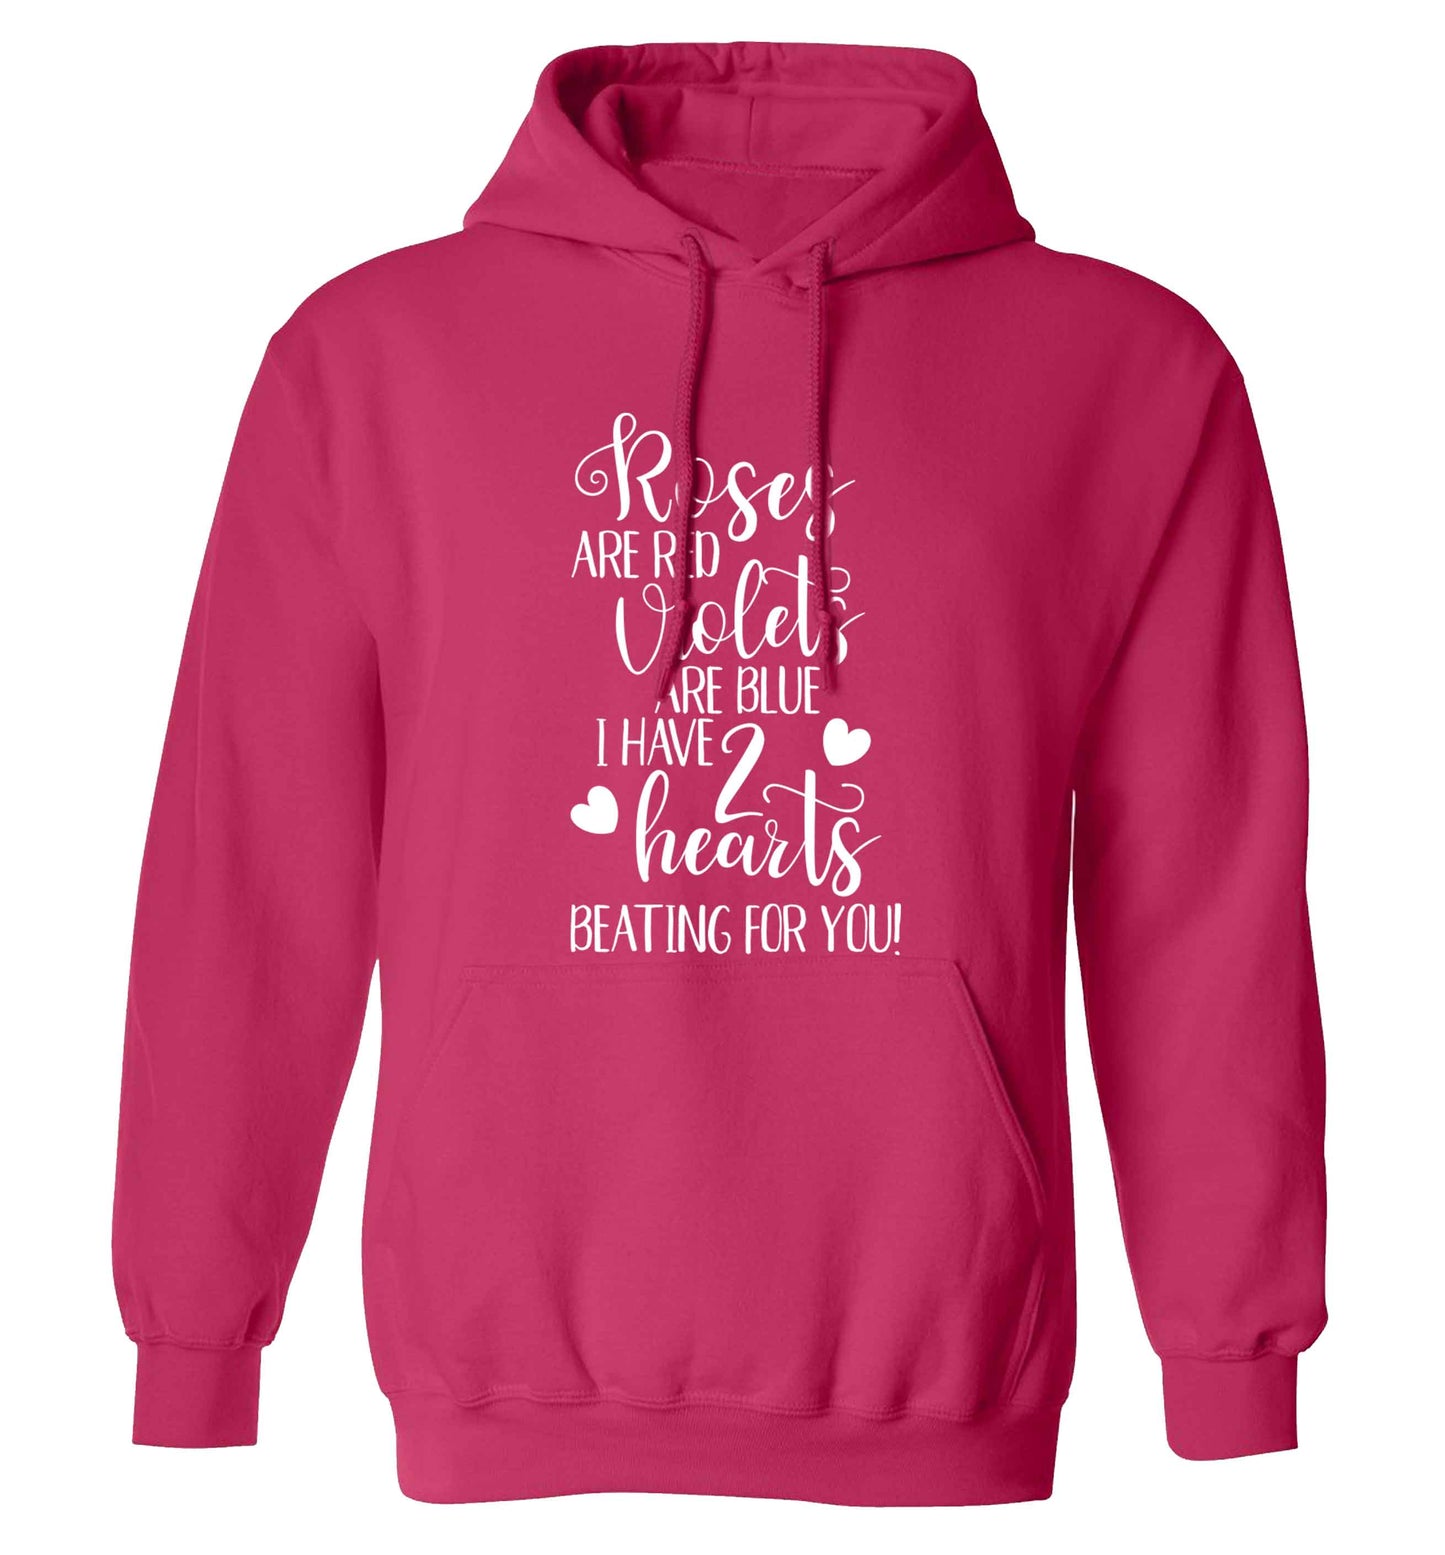 Roses are red violets are blue I have two hearts beating for you adults unisex pink hoodie 2XL